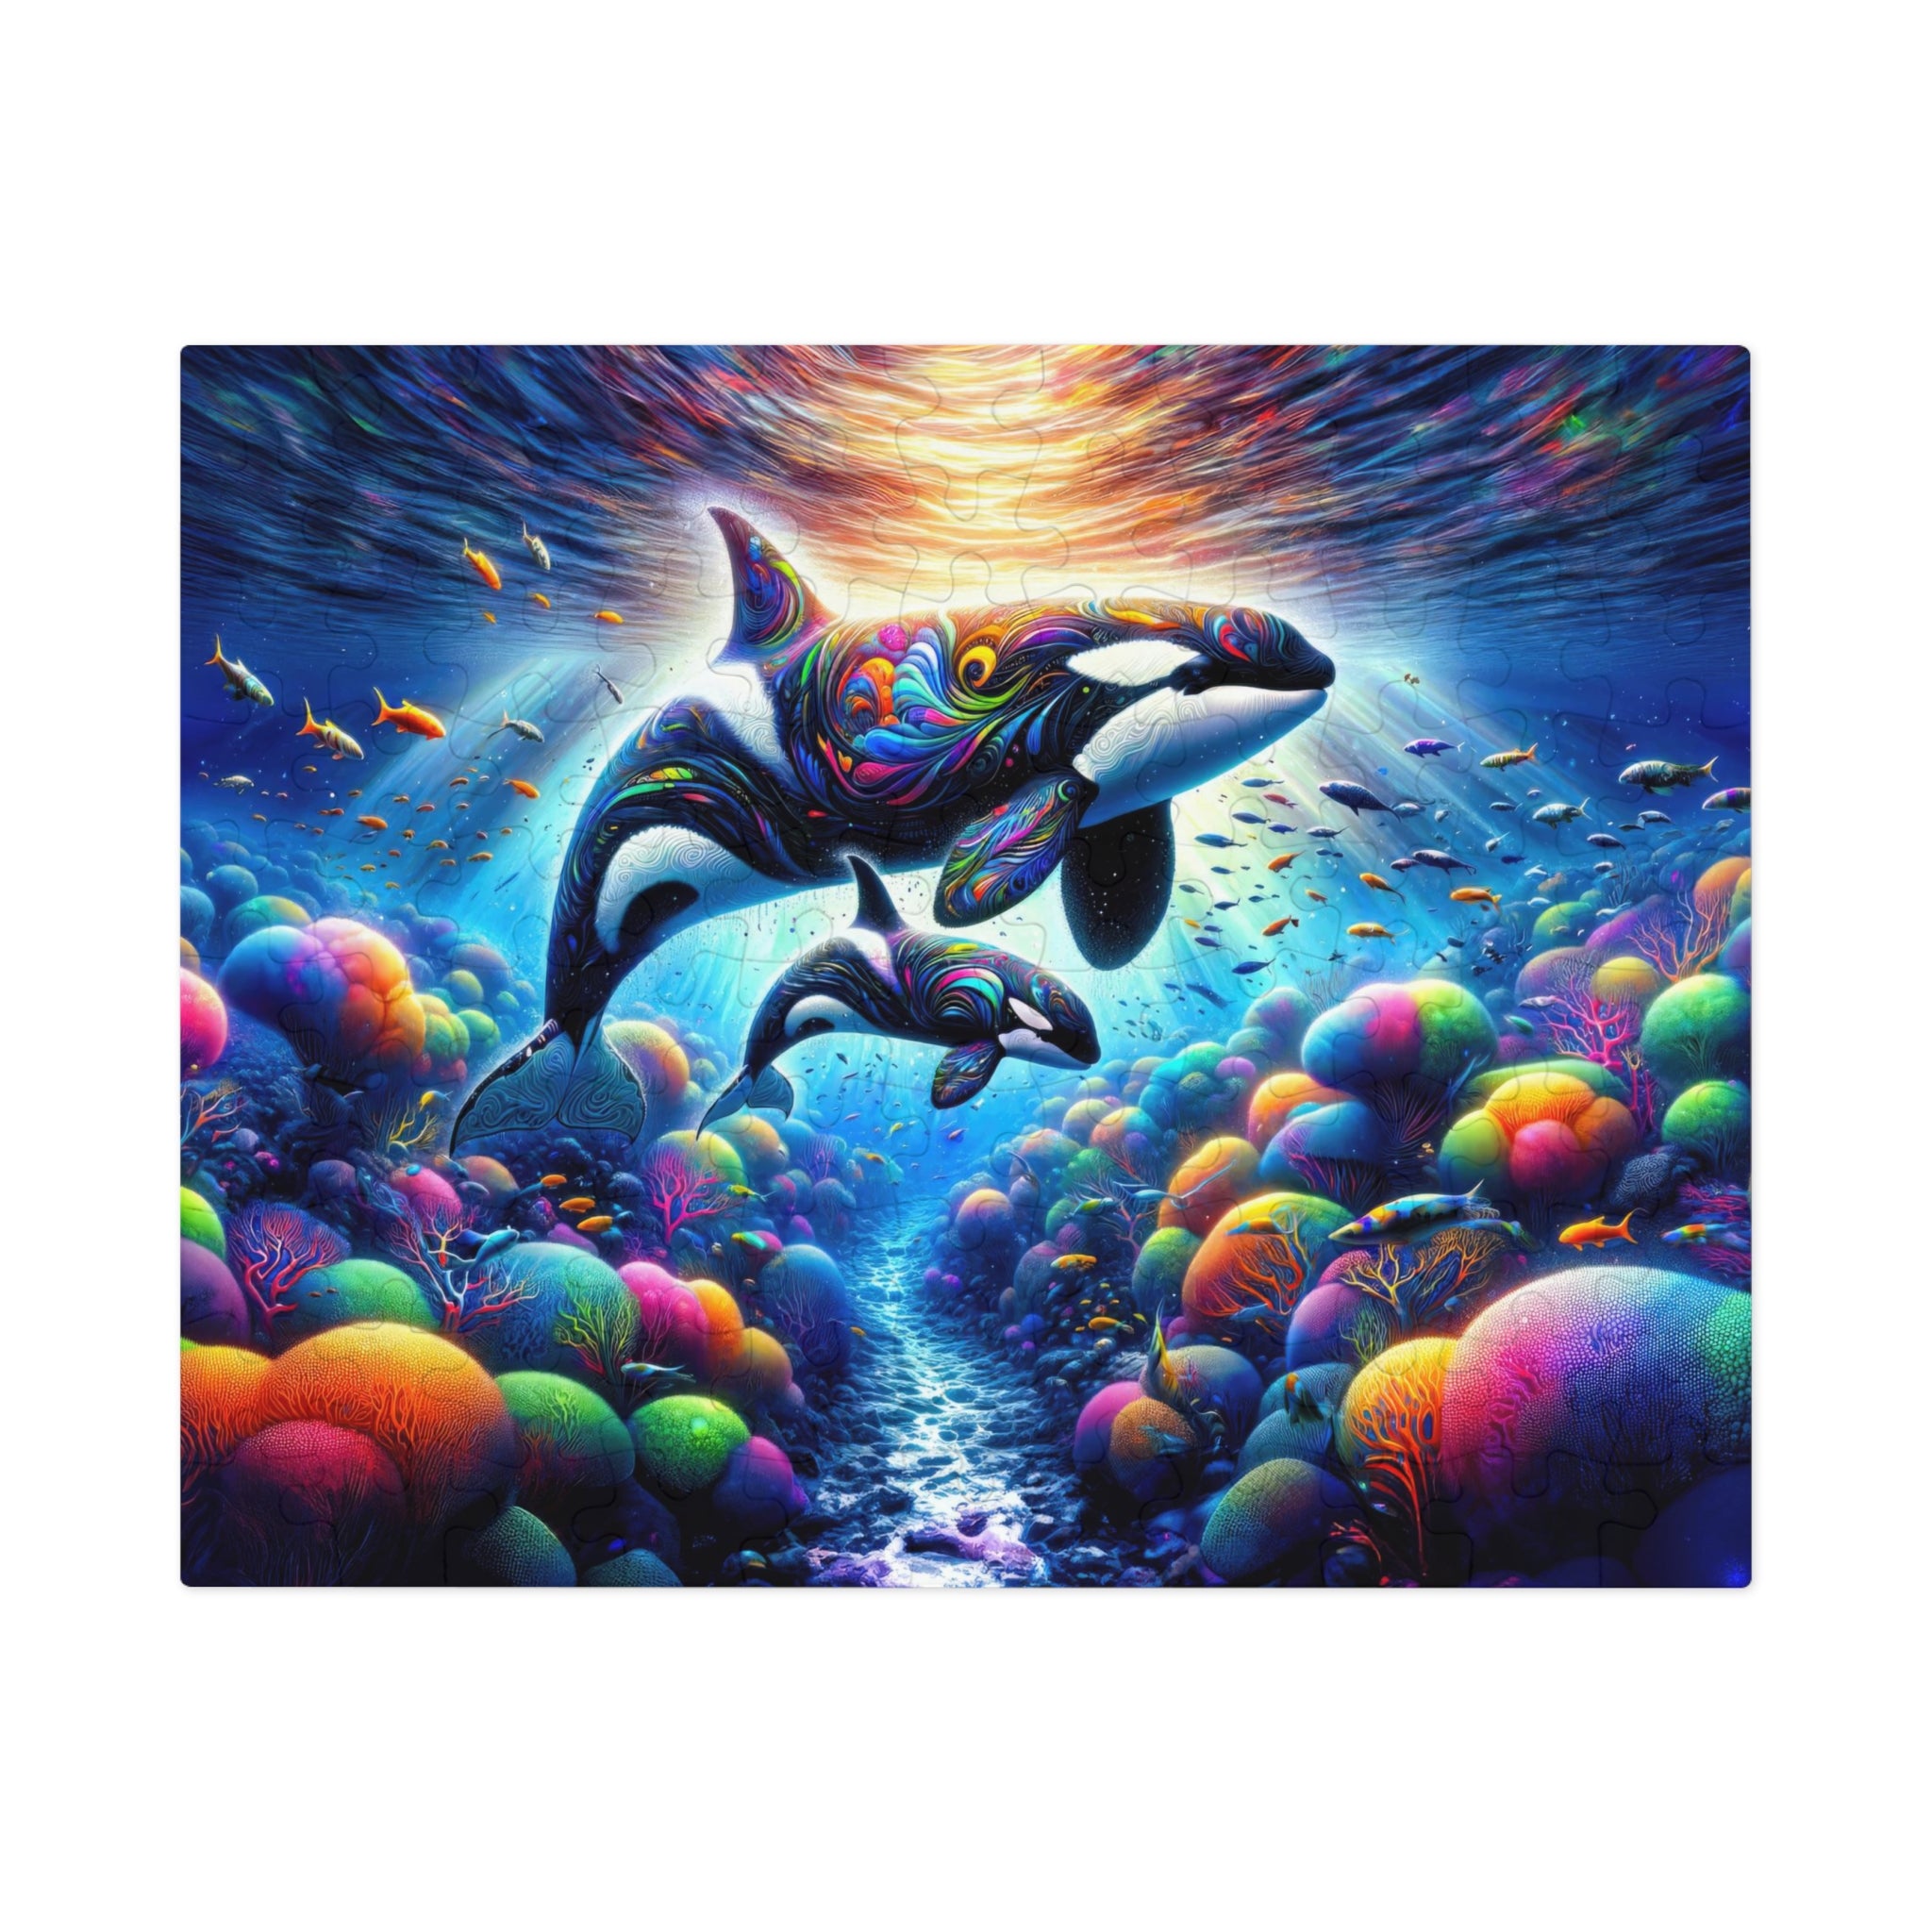 Lullaby of the Luminous Depths Jigsaw Puzzle